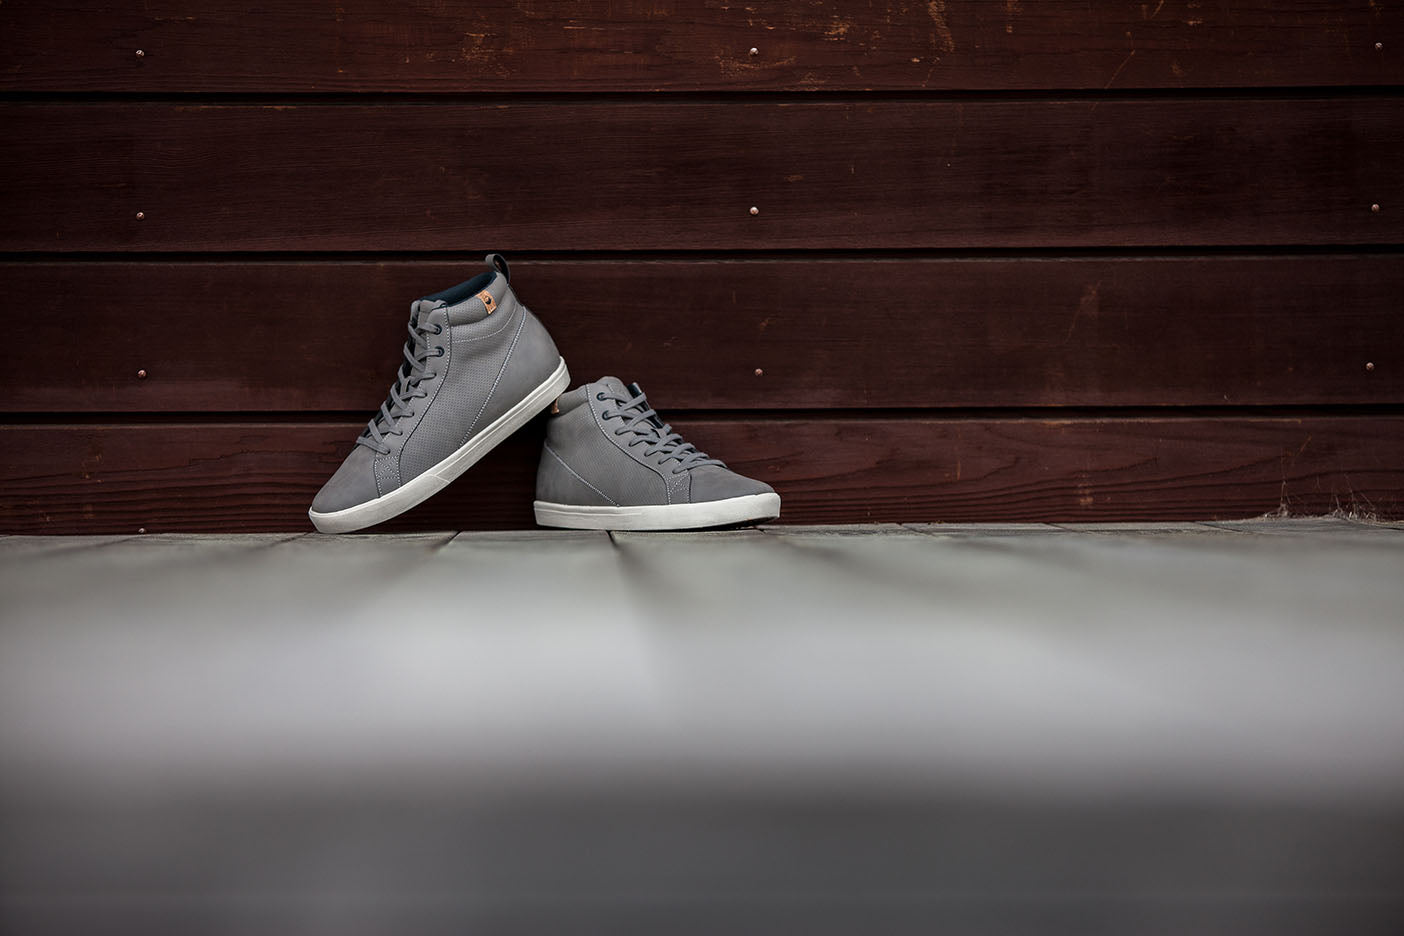 men's dark grey shoes facing left and right